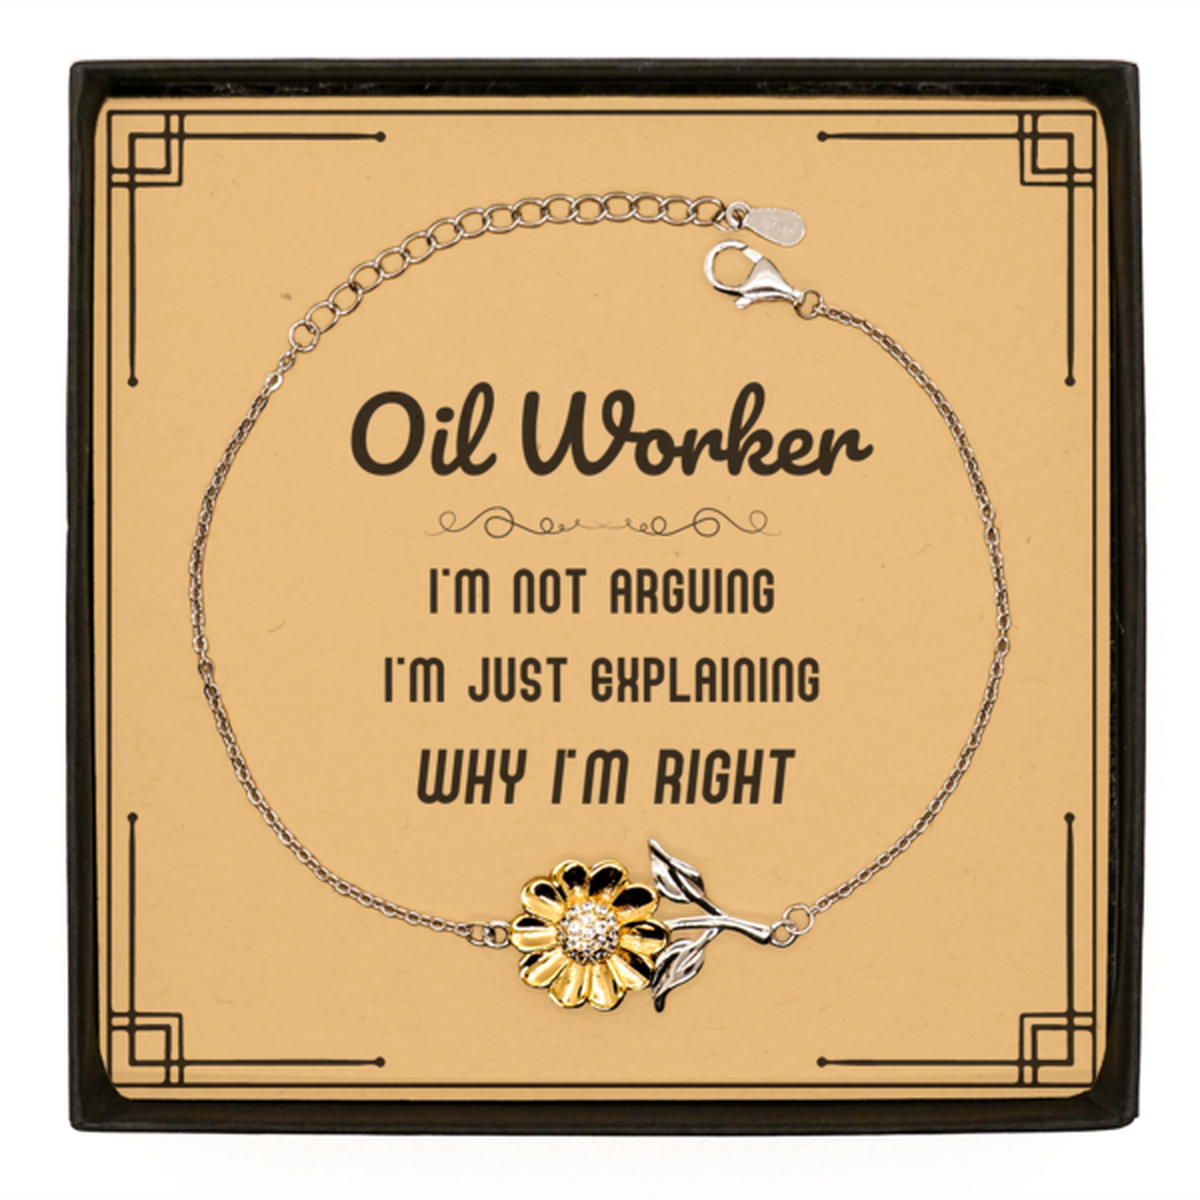 Oil Worker I'm not Arguing. I'm Just Explaining Why I'm RIGHT Sunflower Bracelet, Funny Saying Quote Oil Worker Gifts For Oil Worker Message Card Graduation Birthday Christmas Gifts for Men Women Coworker